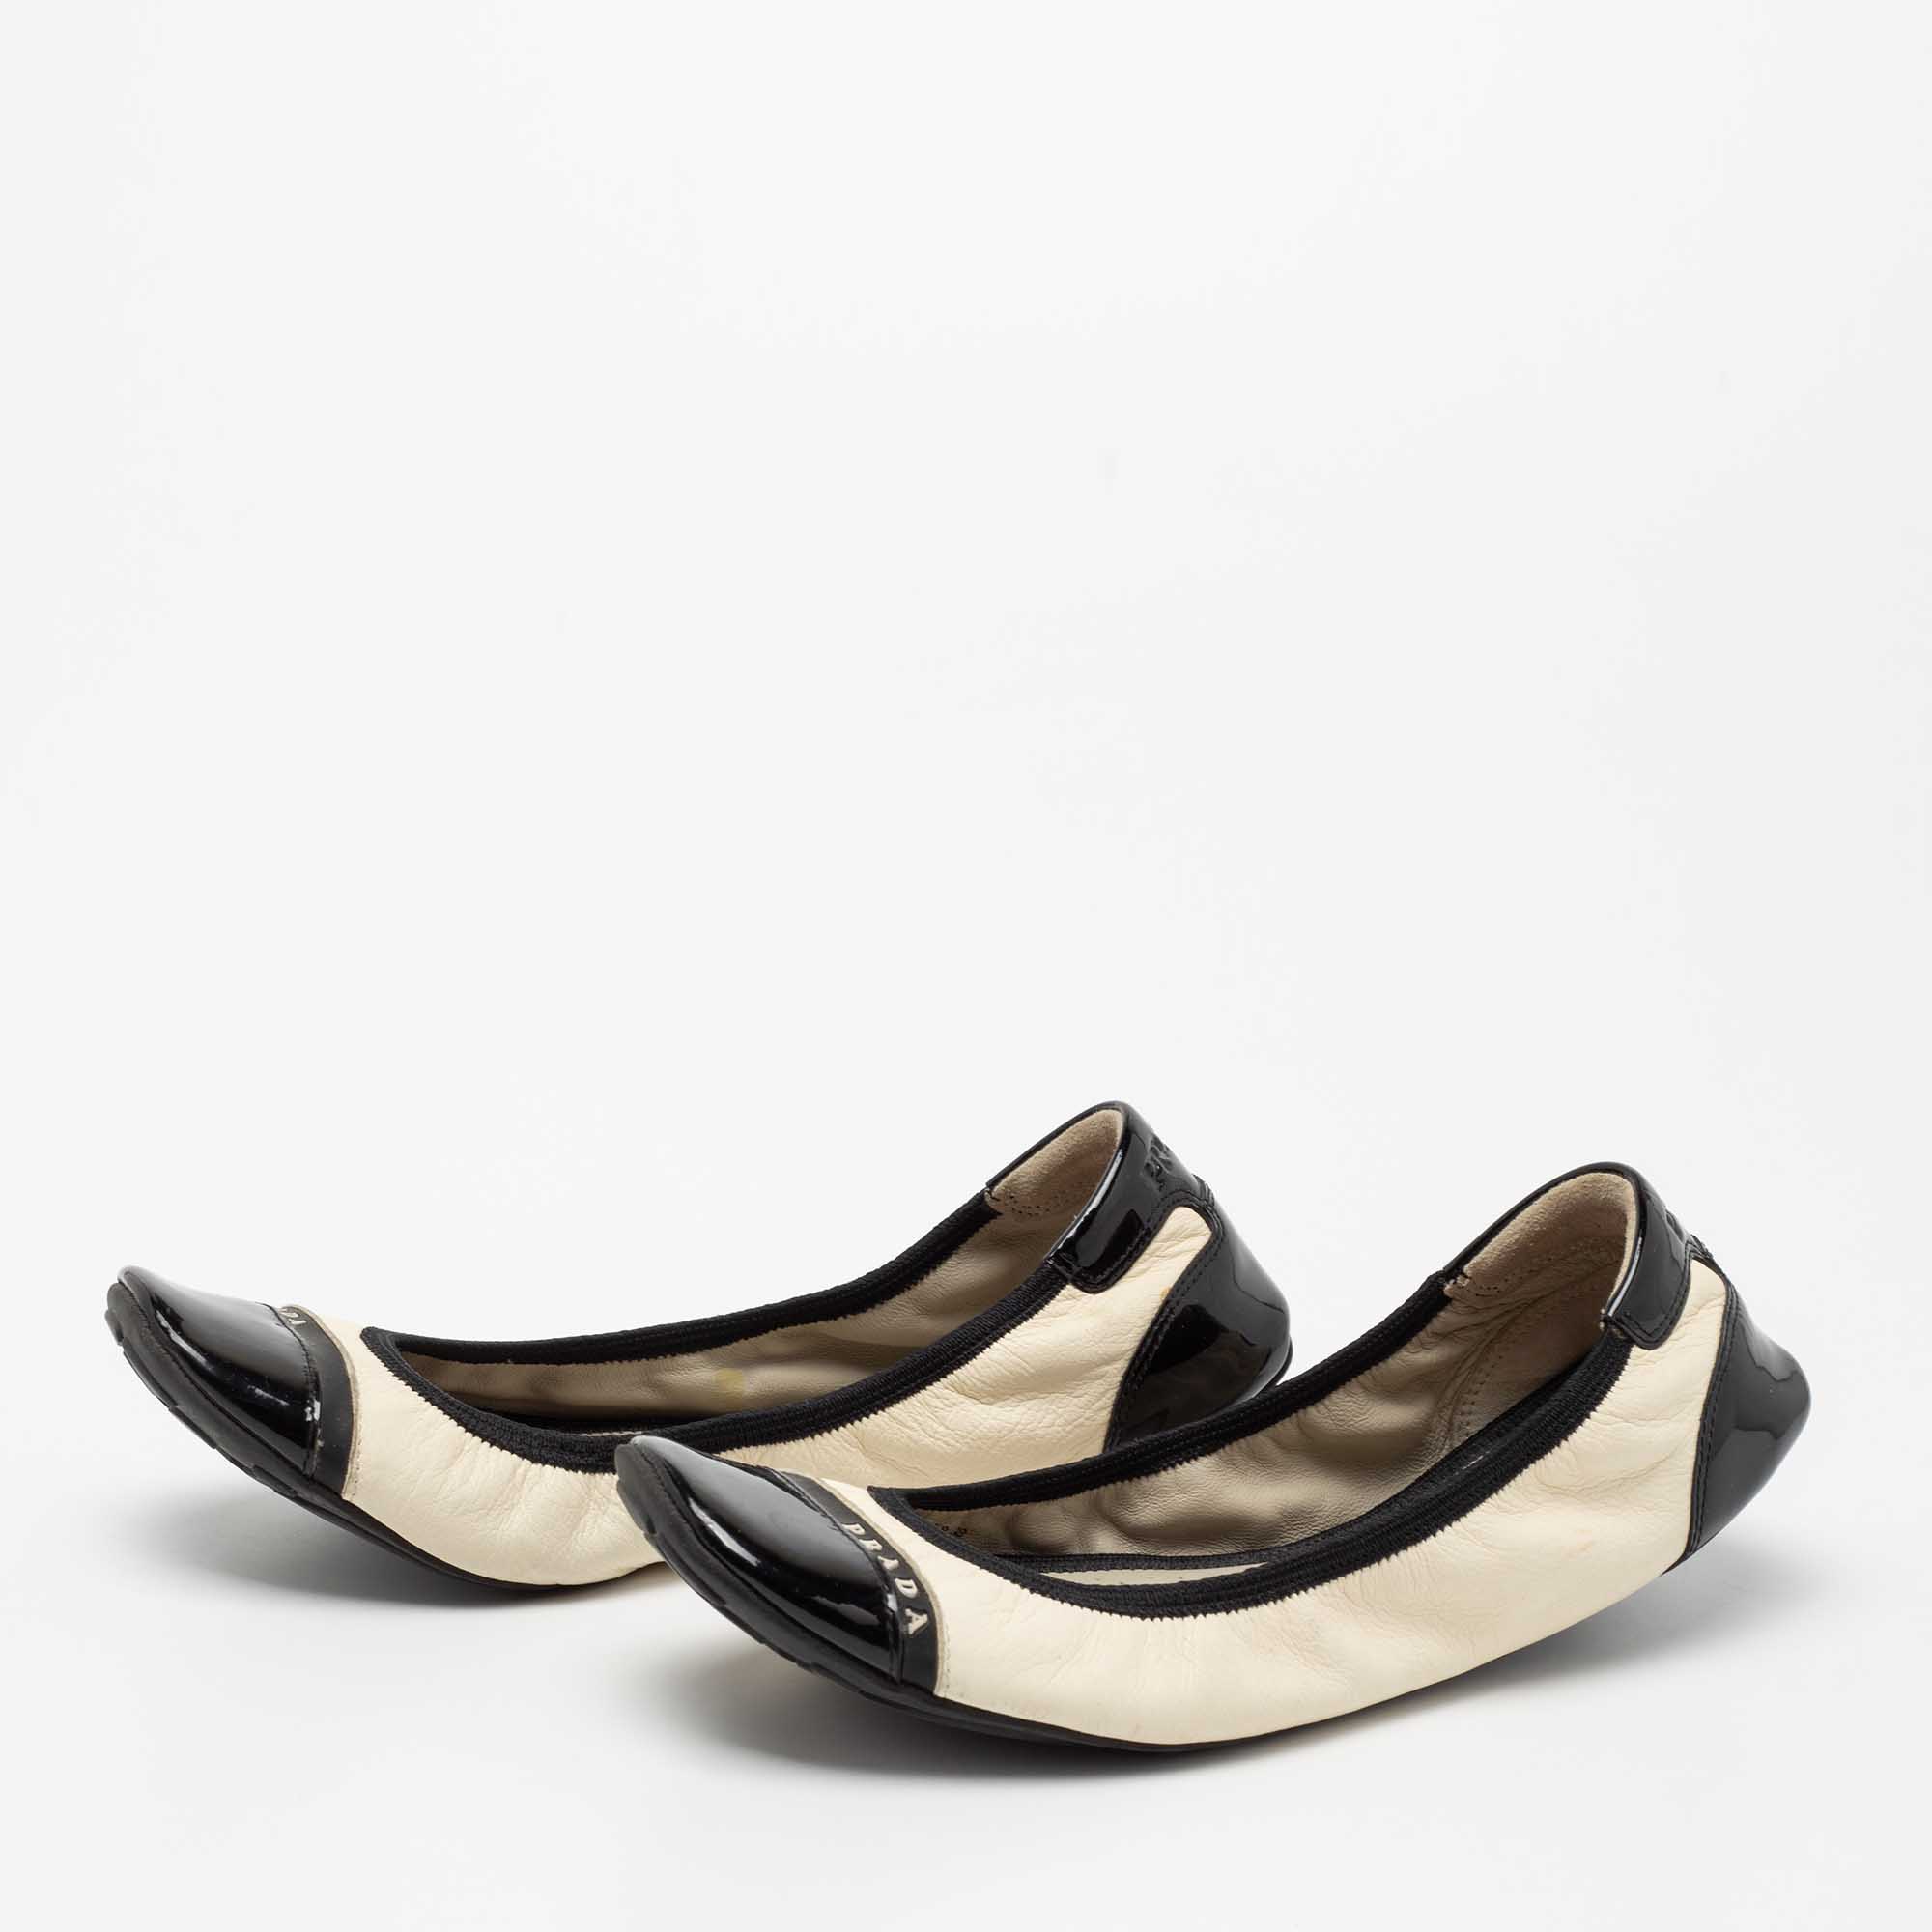 

Prada Sport Off White/Black Leather And Patent Leather Cap Toe Scrunch Ballet Flats Size